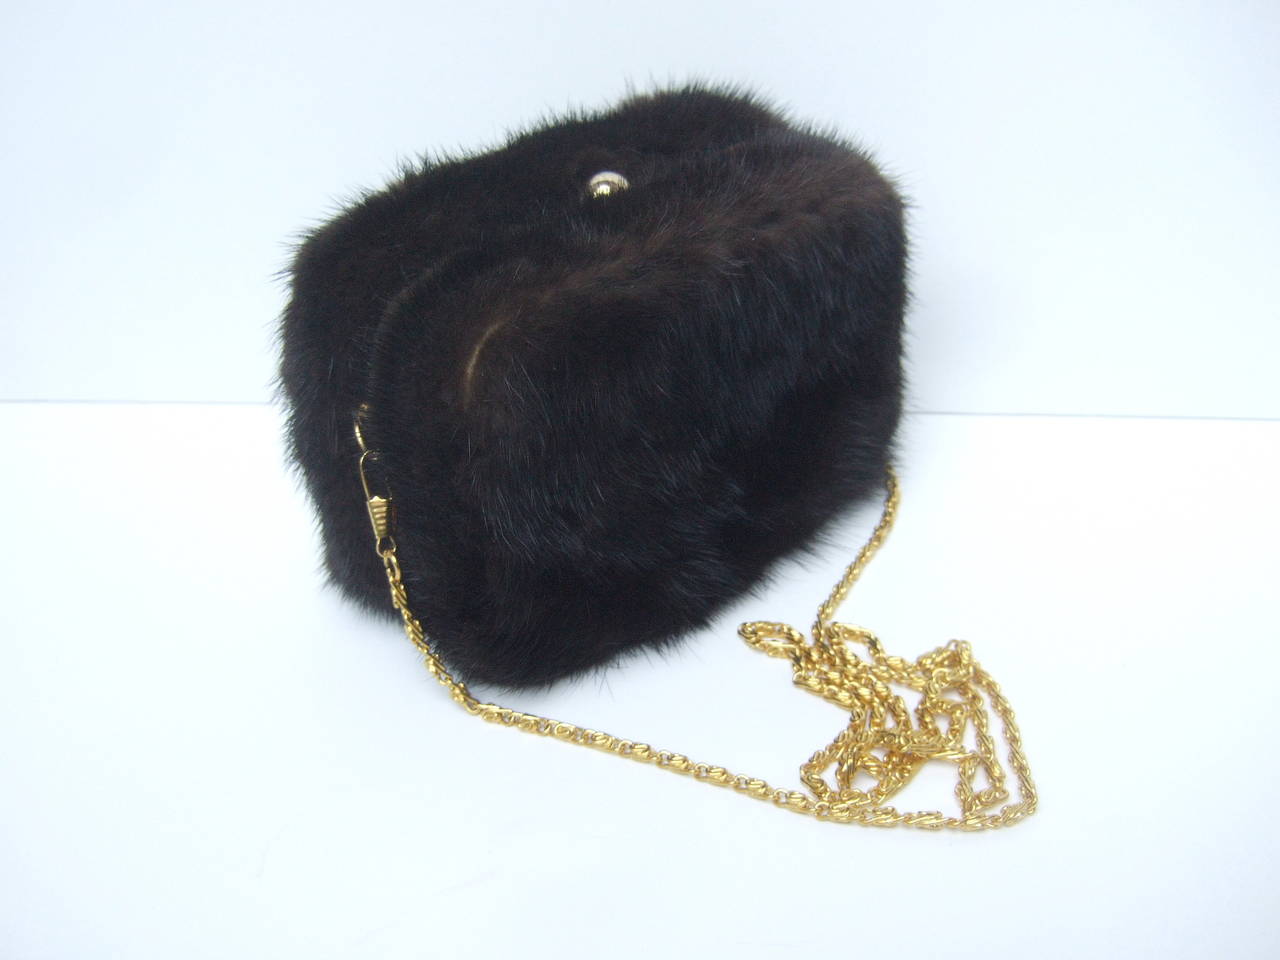 Luxurious mink fur diminutive evening bag c 1980s
The elegant mink cubed shaped evening bag is covered with plush mahogany dark brown fur in all sides. The clasp & chain strap are designed with sleek gilt metal

The versatile design converts from